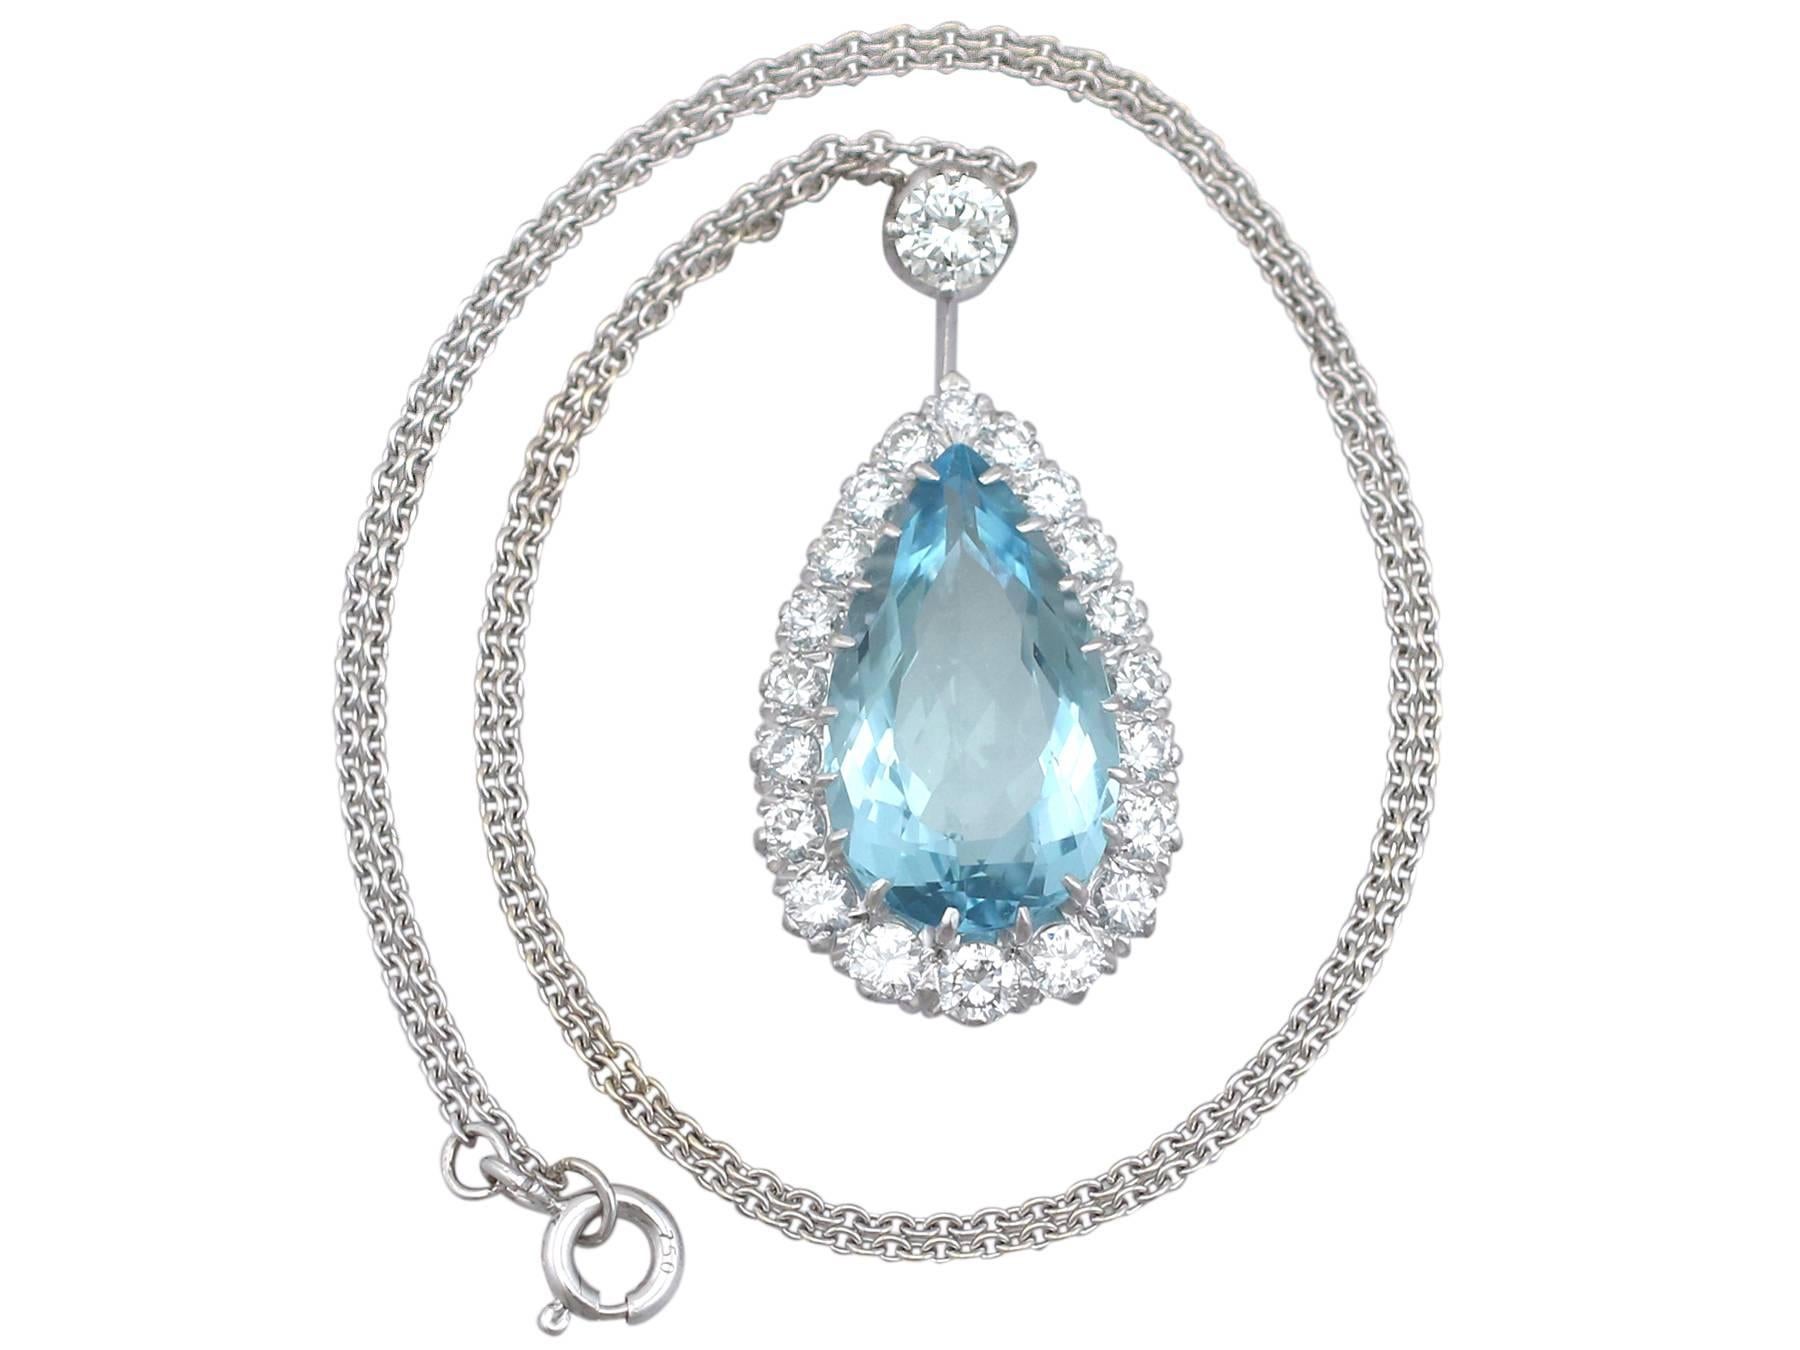 This stunning, fine and impressive aquamarine and diamond pendant has been crafted in 18k white gold.

The pierced decorated, multi-claw frame is ornamented with a feature 9.15 ct pear cut aquamarine, claw set in subtle relief to the center.

The